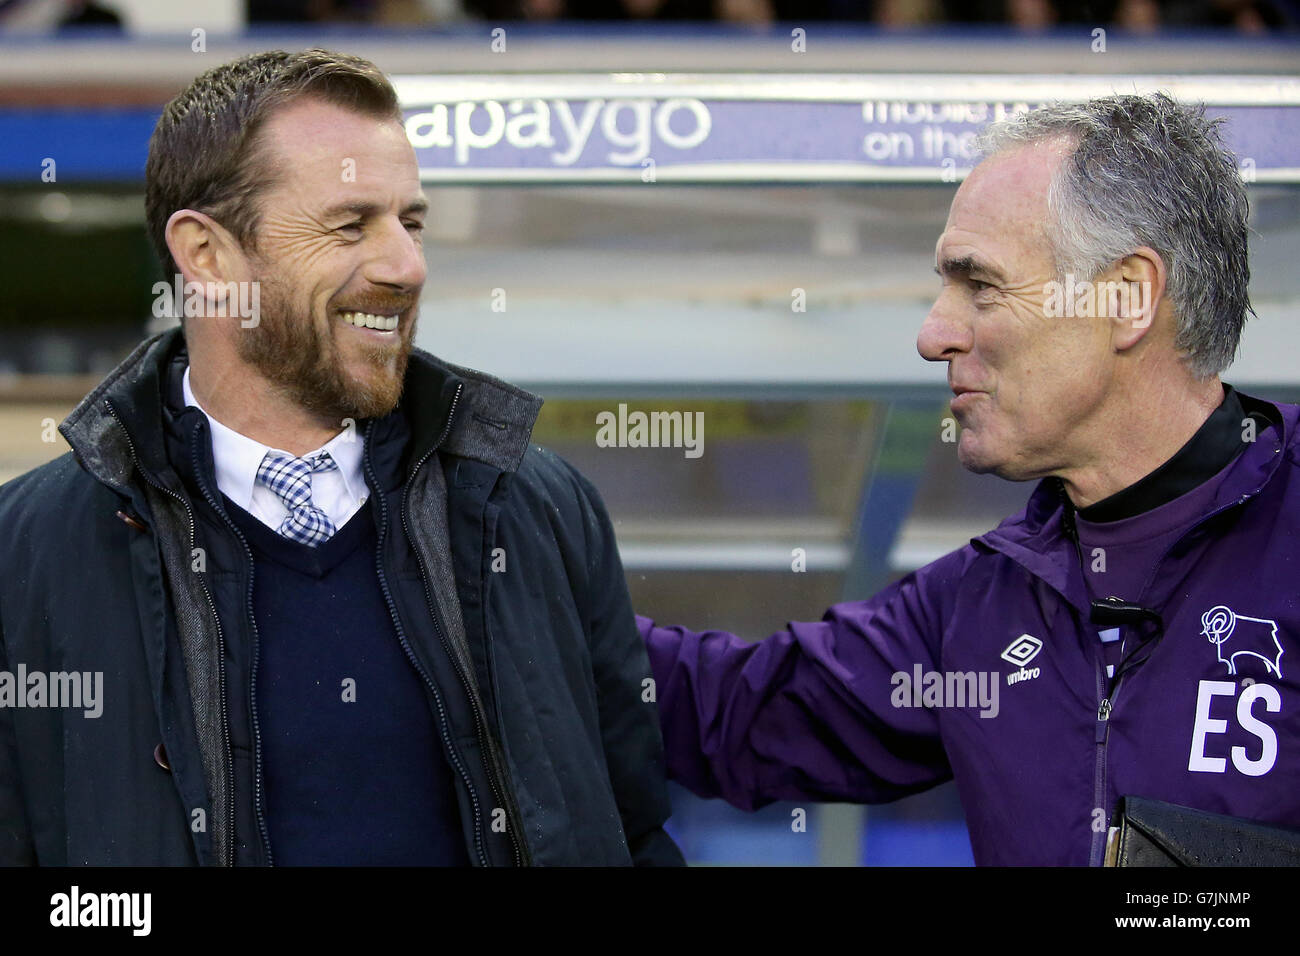 Soccer - Sky Bet Championship - Birmingham City v Derby County - St Andrew's Stadium. Birmingham City manager Gary Rowett and Derby County goalkeeping coach Eric Steele Stock Photo